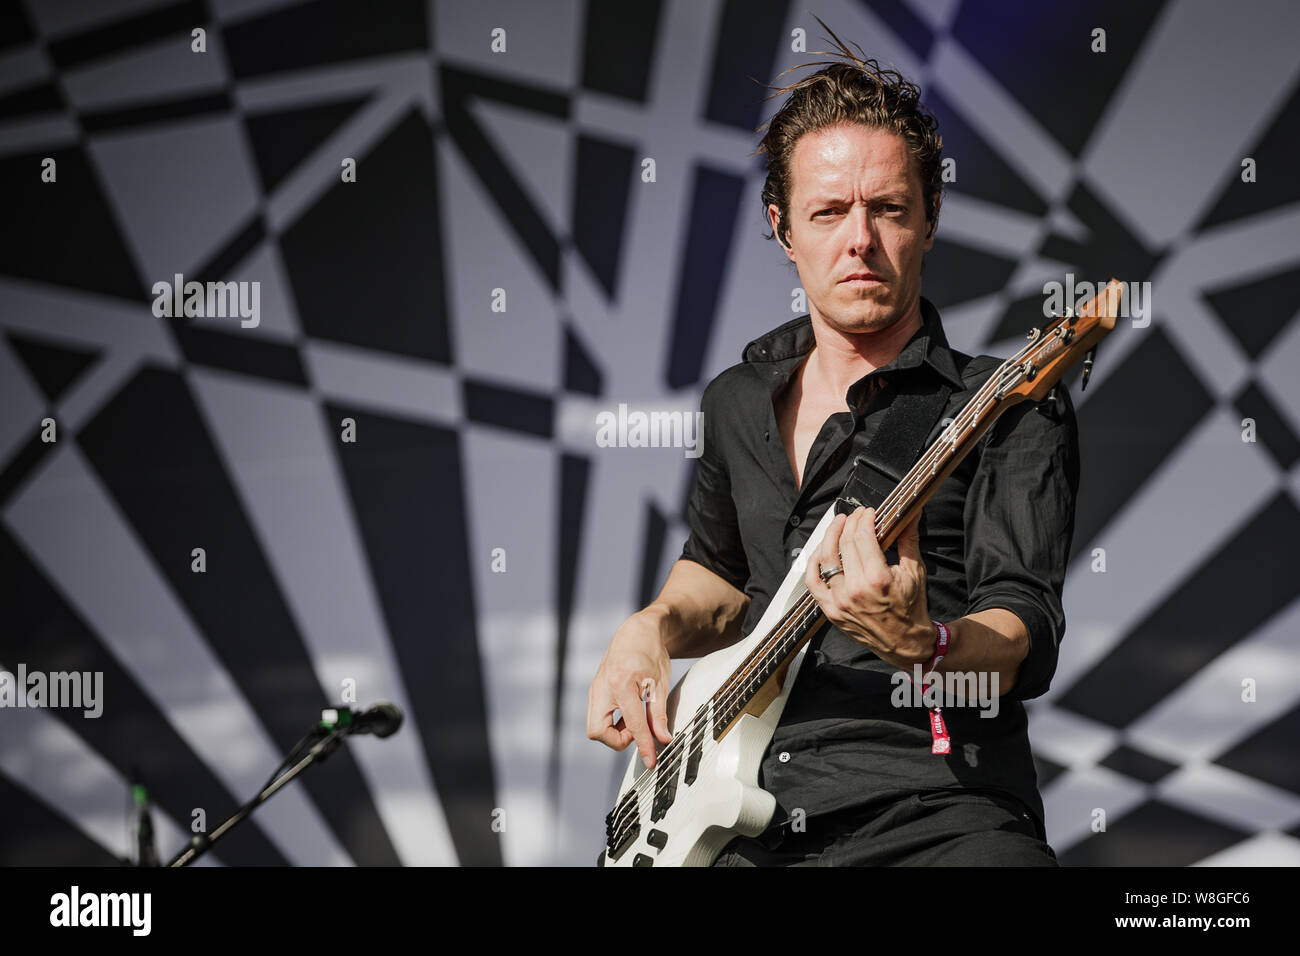 Tesseract perform live on stage at Bloodstock Open Air Festival, UK, 9th Aug, 2019. Stock Photo